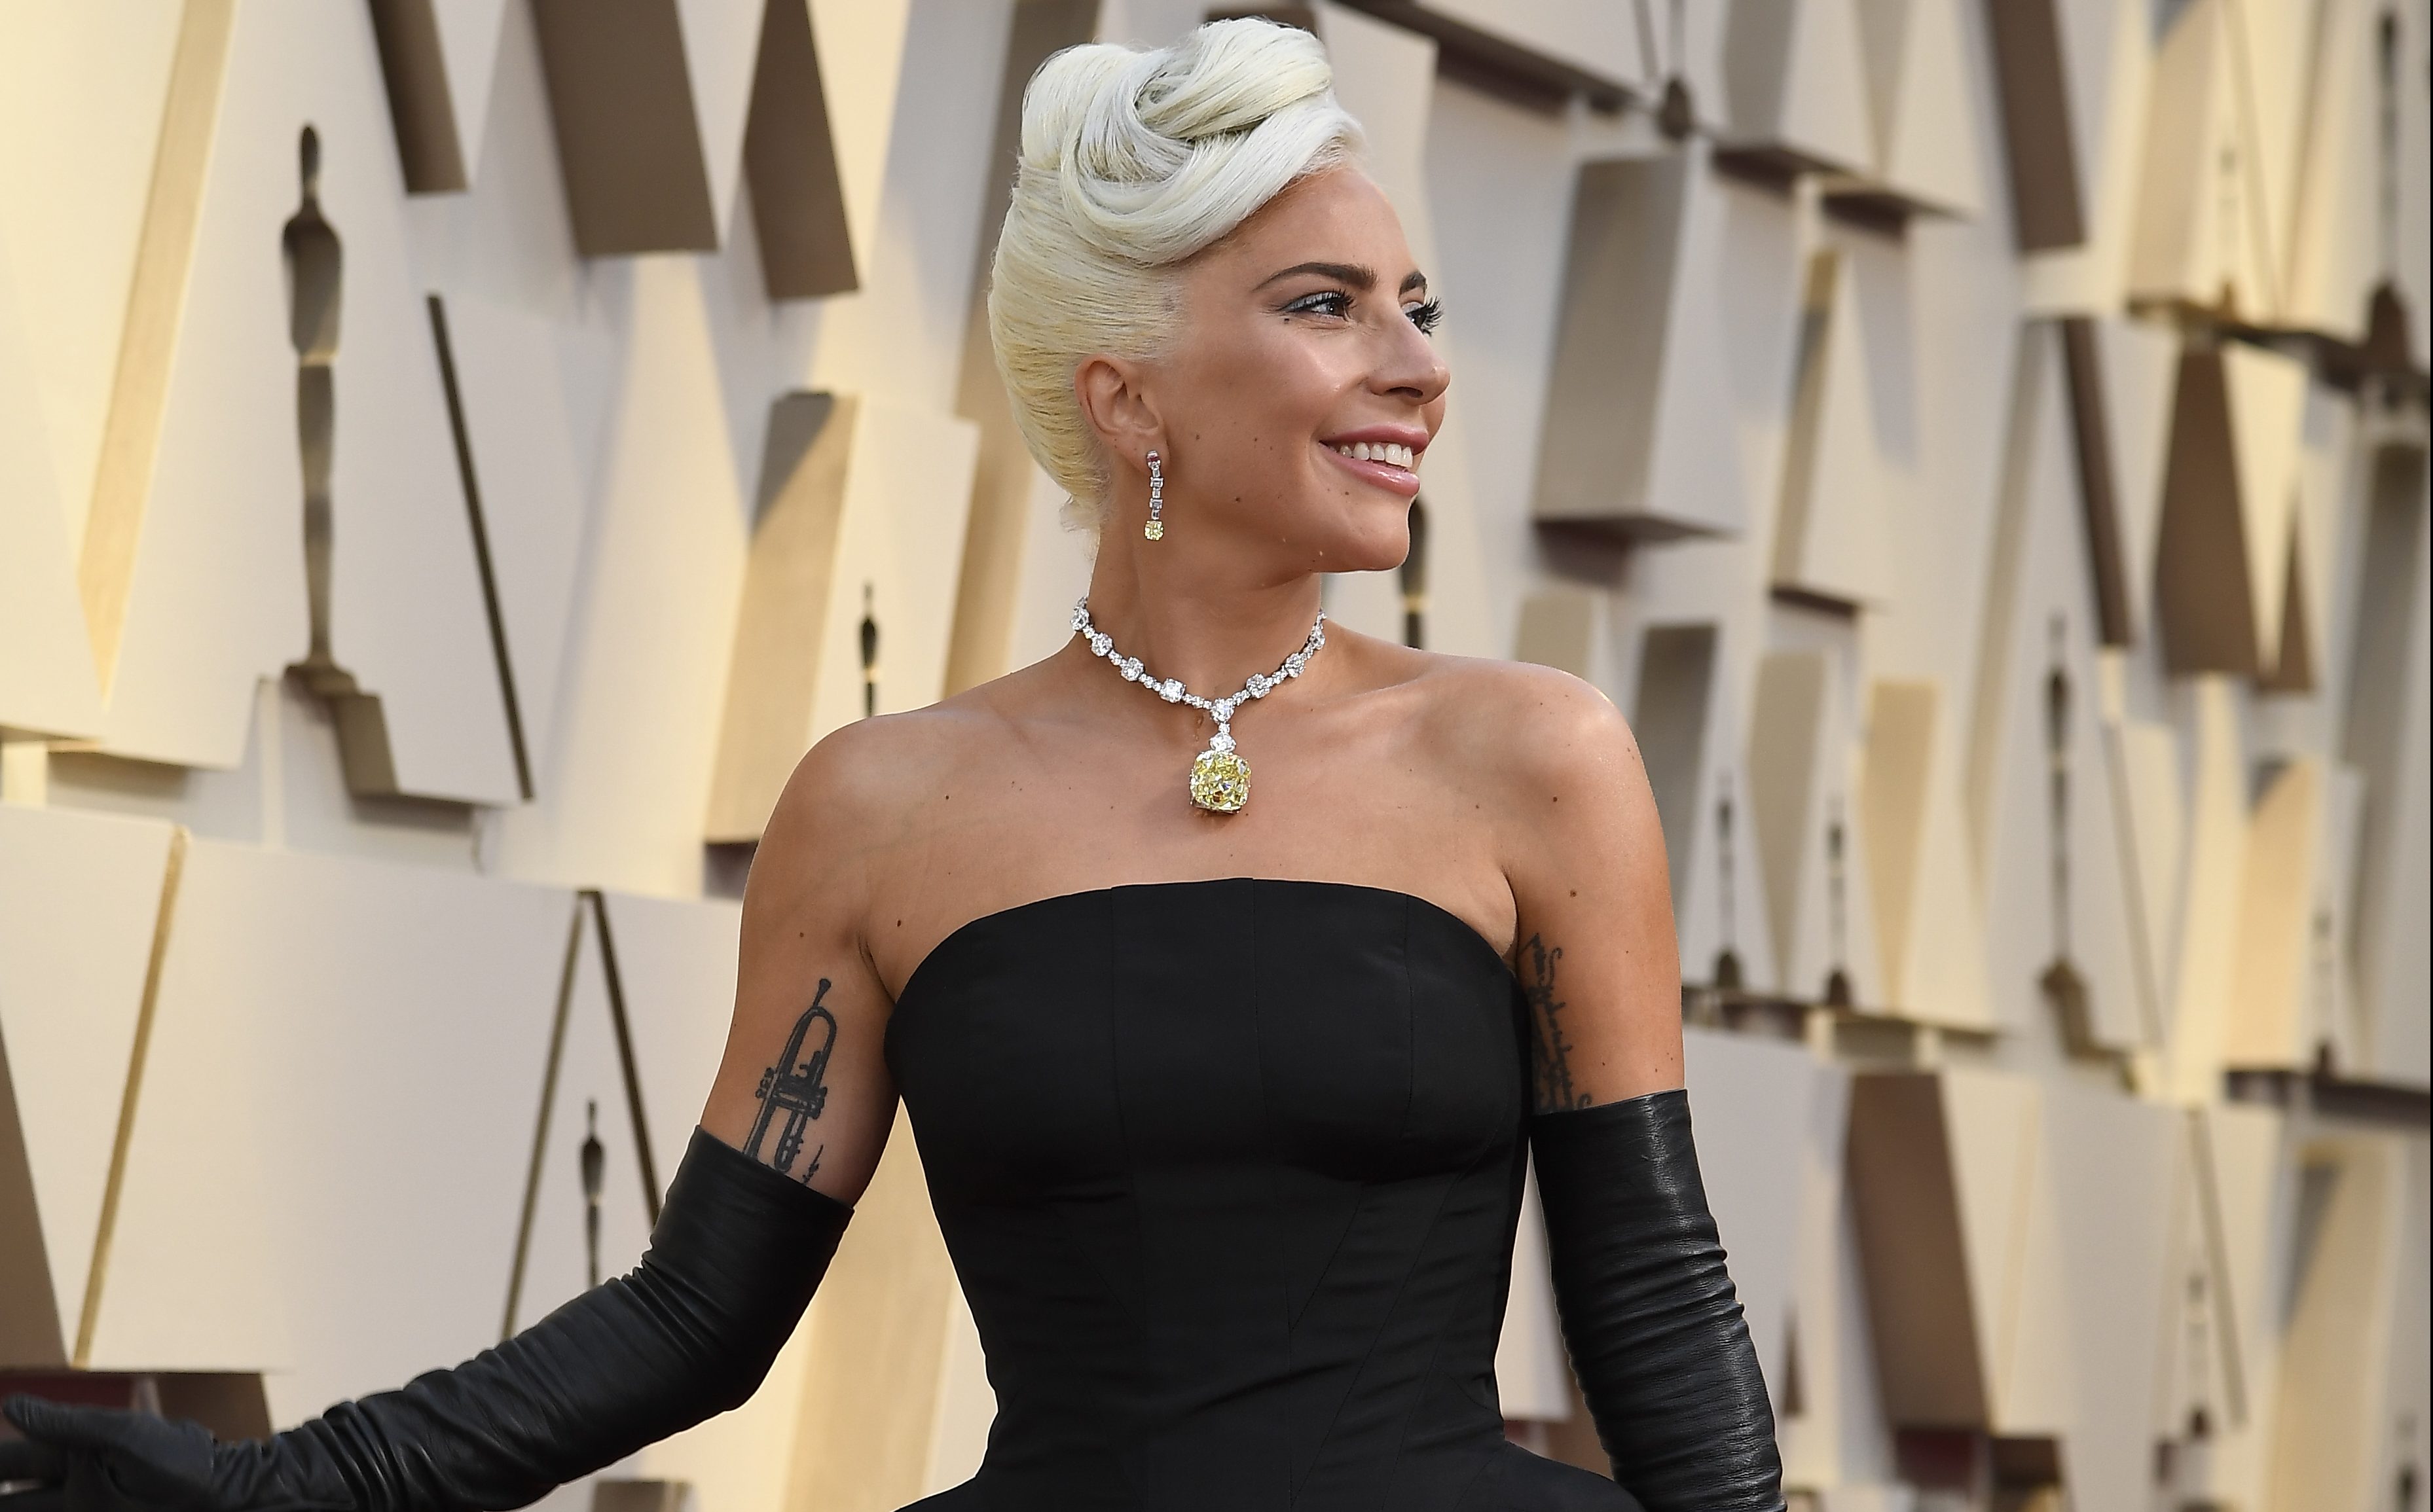 Roundup: ‘A Star is Born’ Robbed at the Oscars; Dumb College Basketball Suspension; & NFL Combine Week is Here